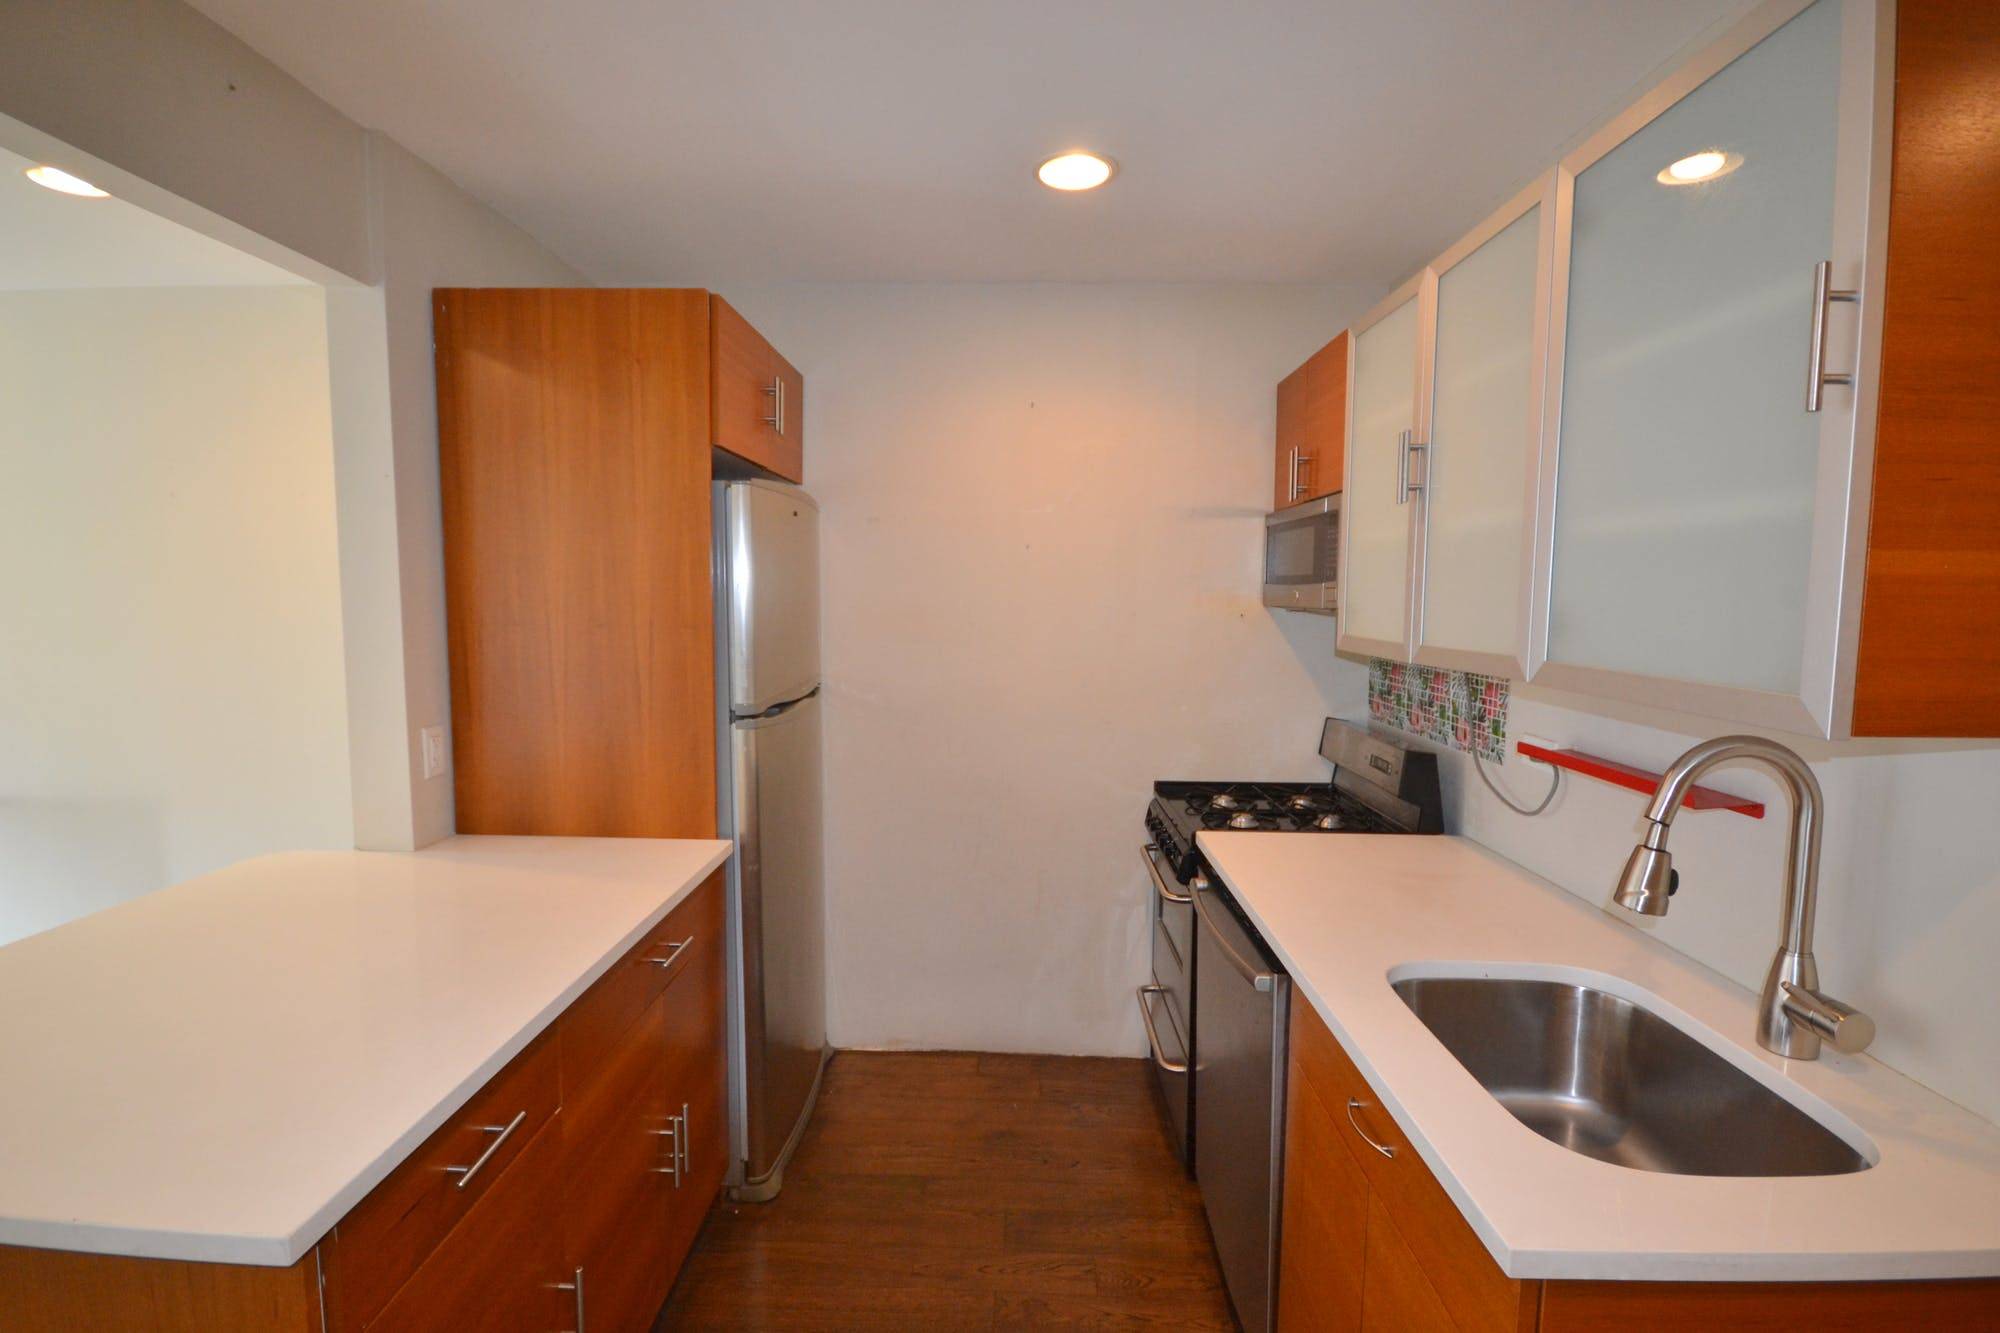 VIDEO TOUR AVAILABLE PLEASE INQUIRE WITH JAMES No Fee Unbeatable One Bedroom Value in Prime Northside Williamsburg.